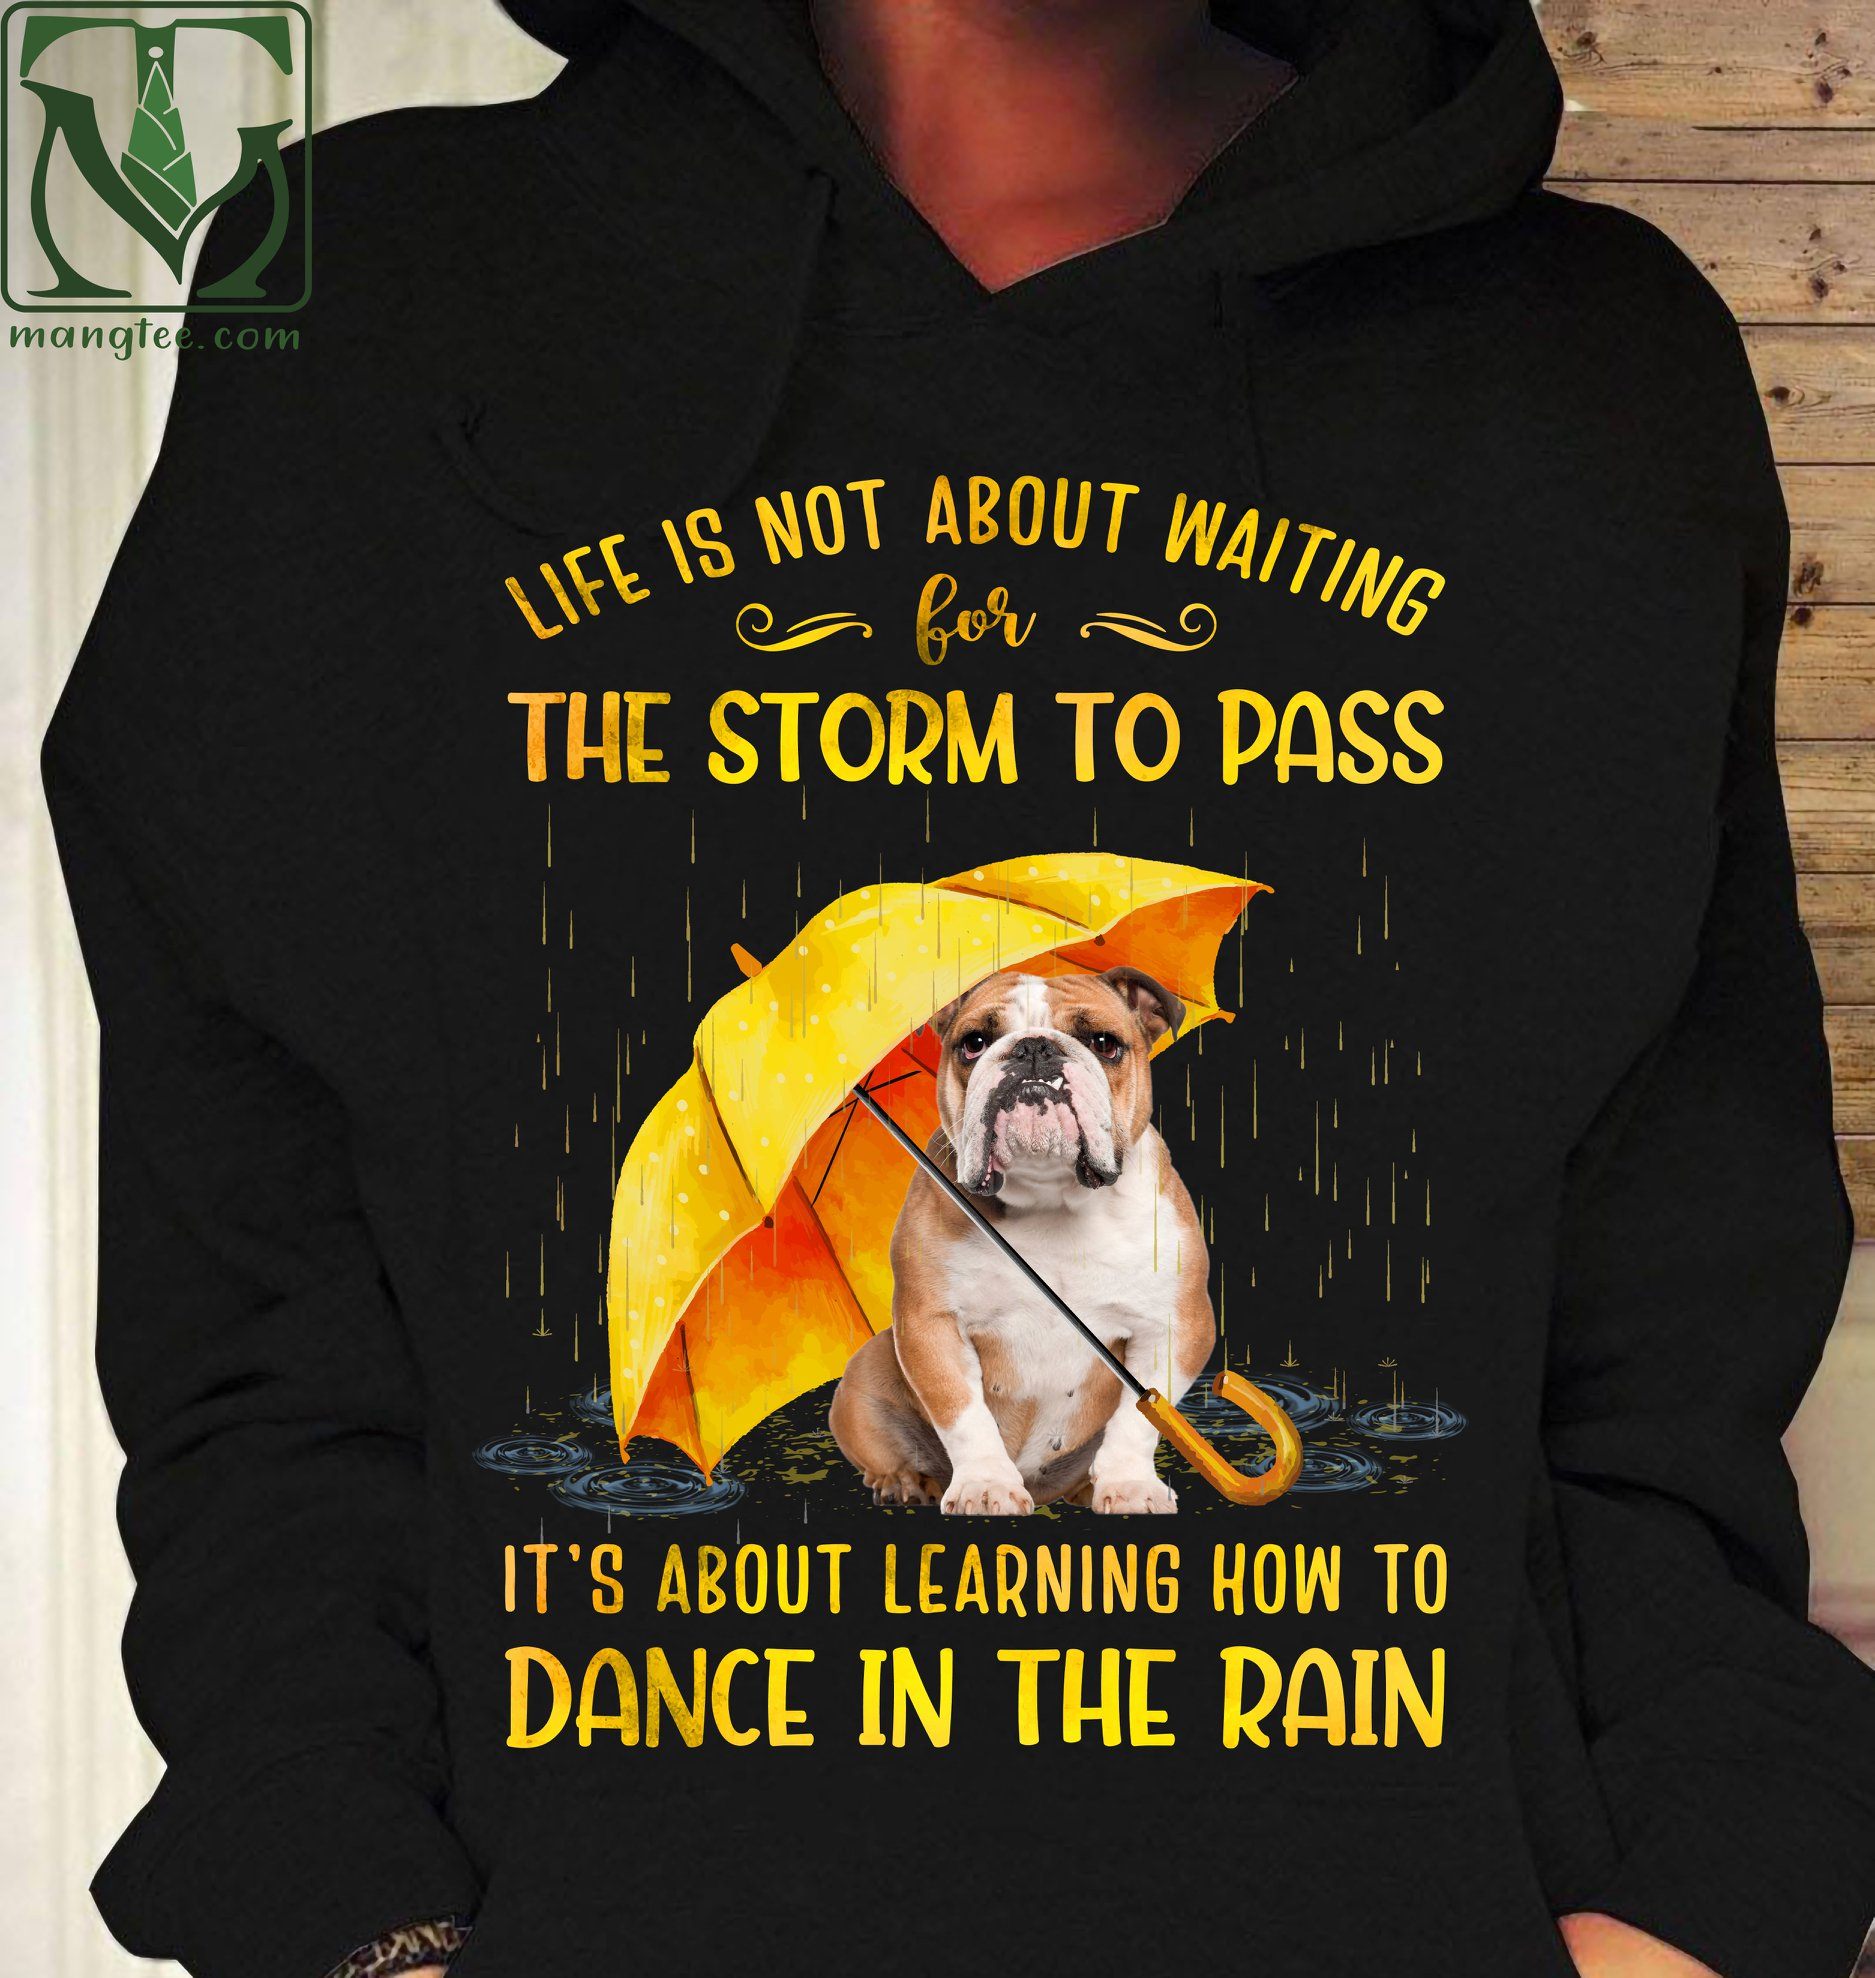 Life is not about waiting for the storm to pass It's about learning how to dance in the rain - Bull dog